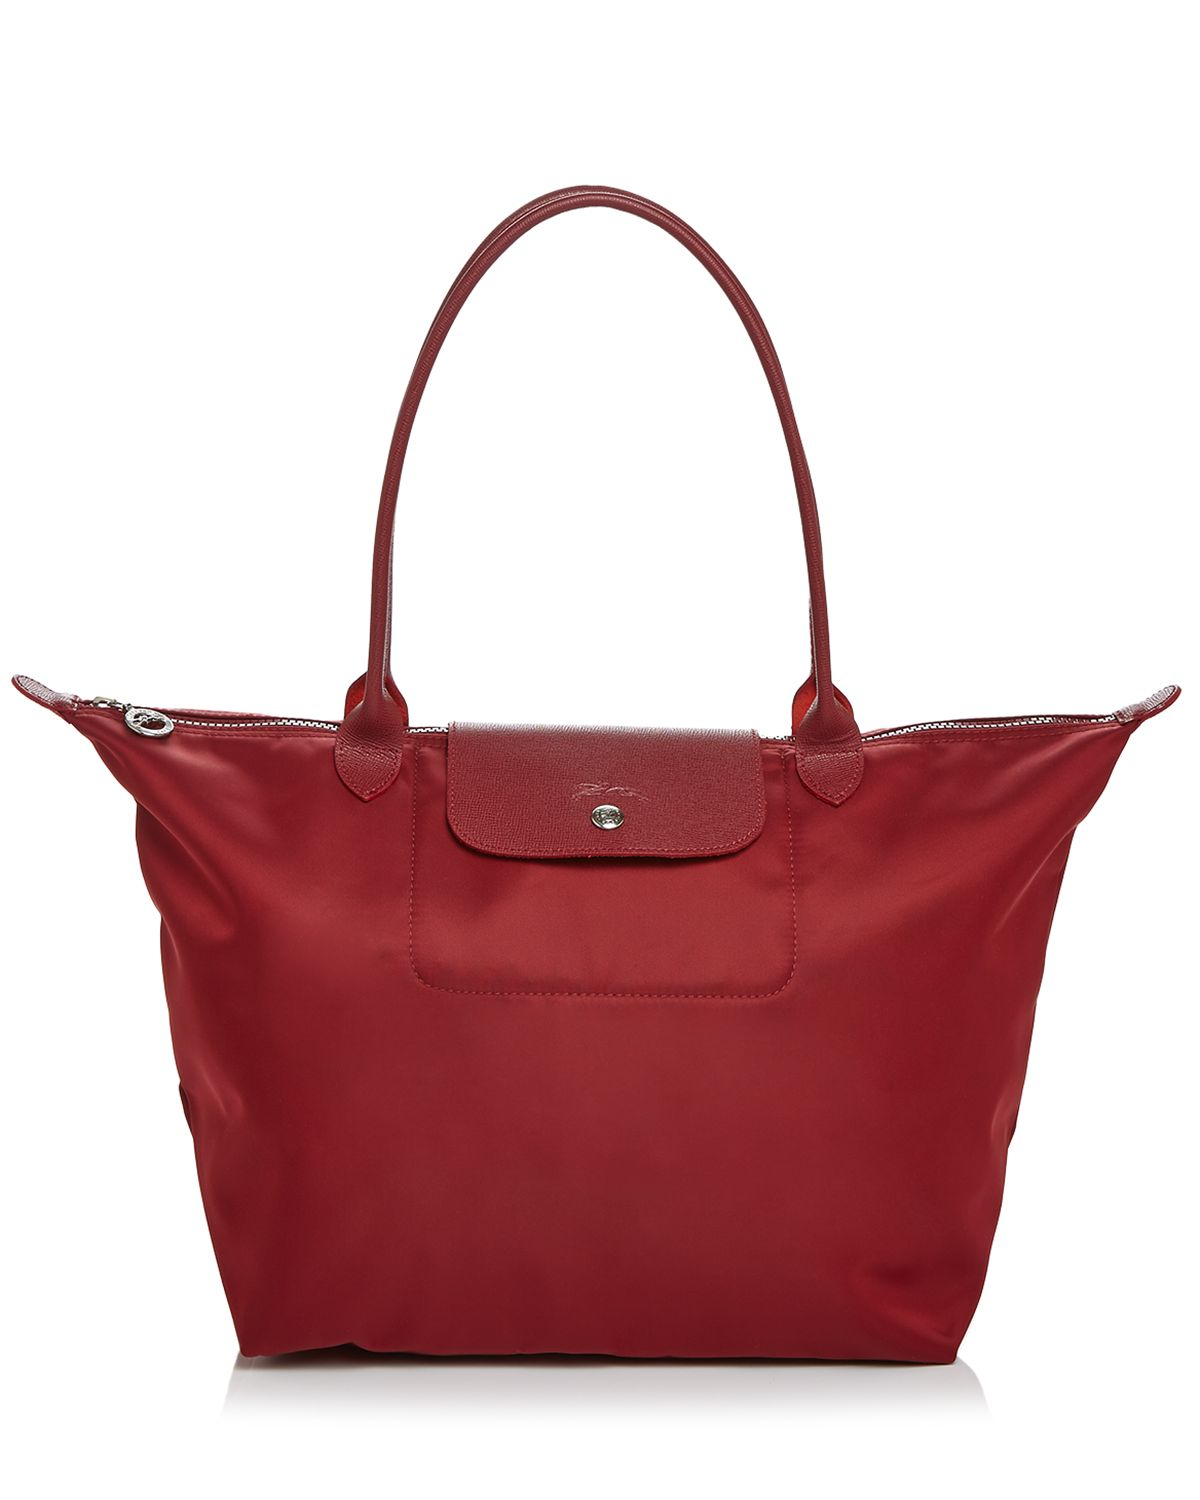 Longchamp Tote - Le Pliage Neo Large in Red (Opera)